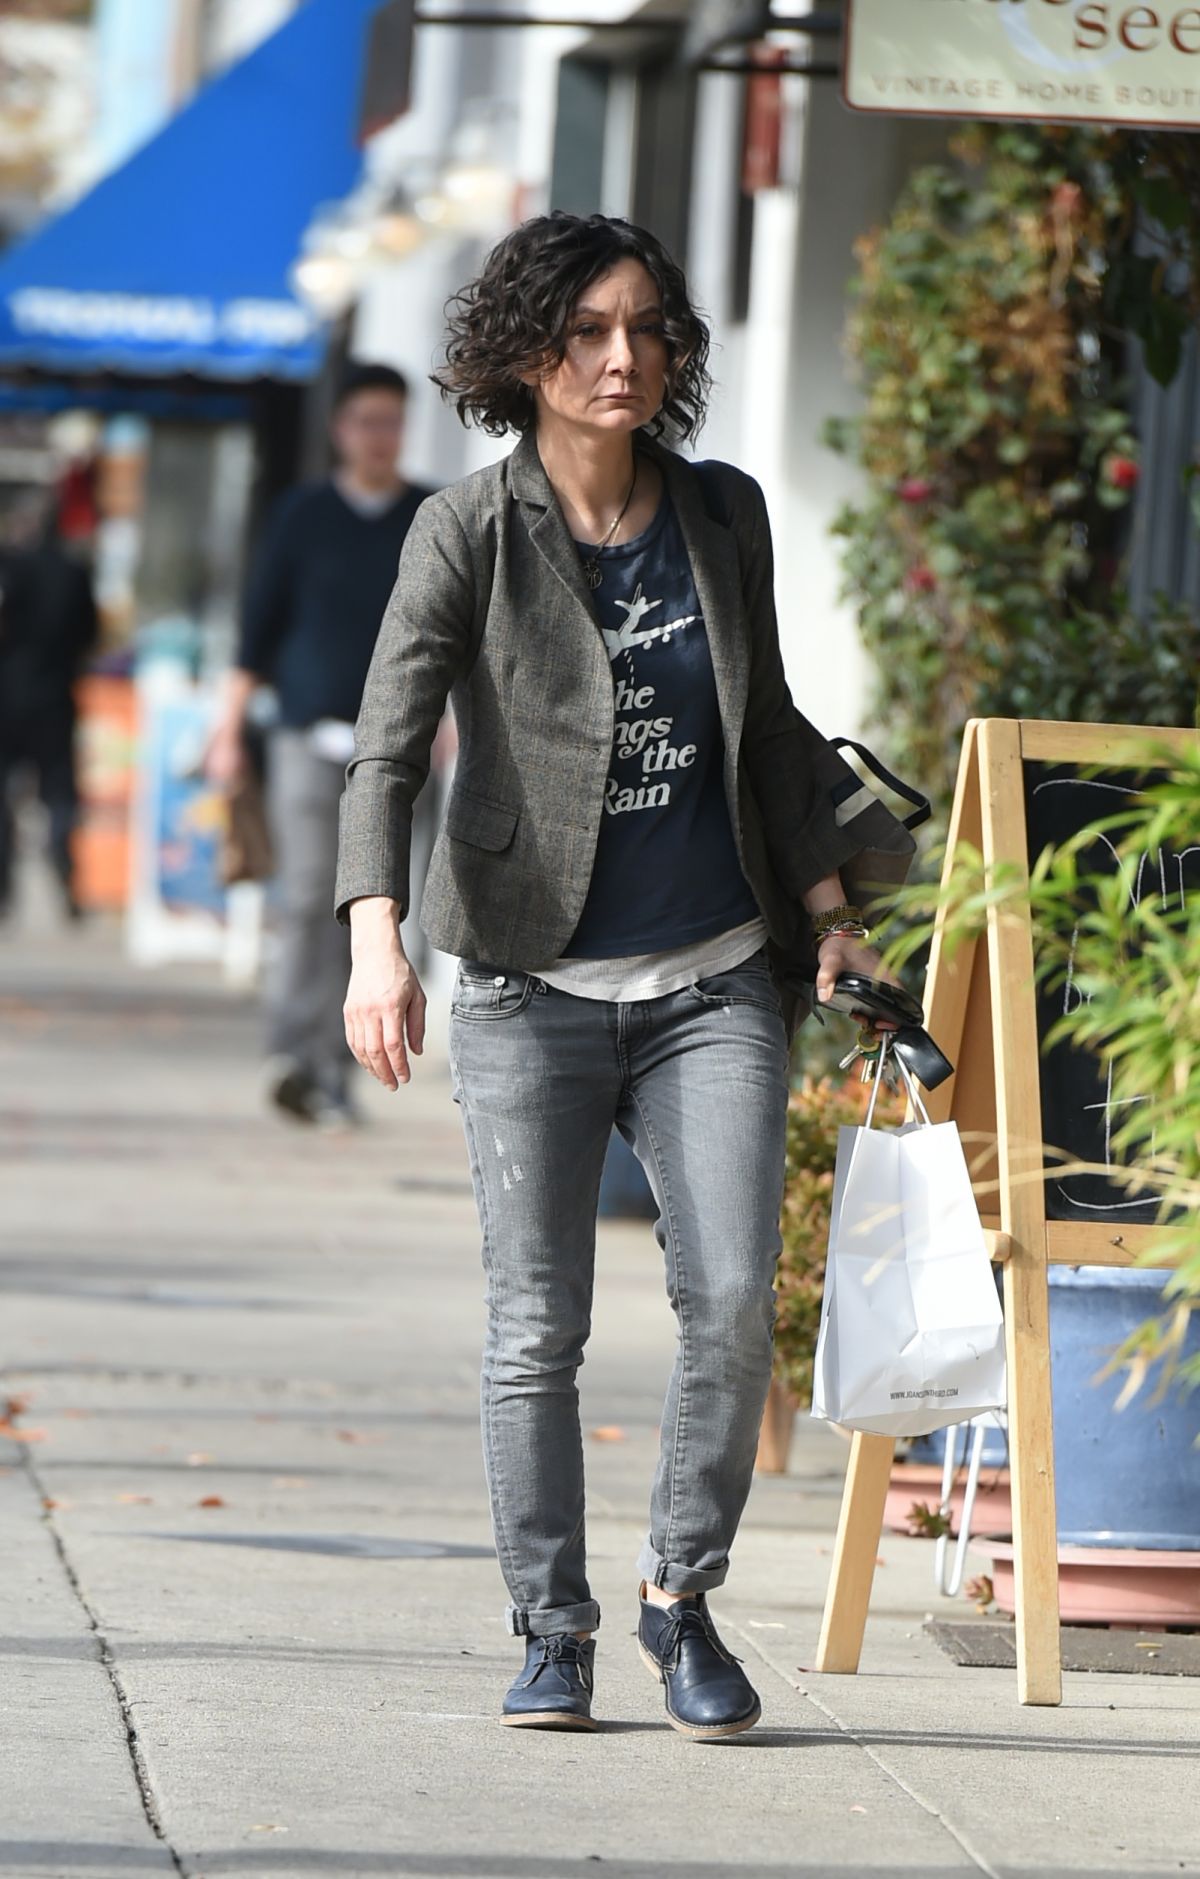 SARA GILBERT Out and About in Los Angeles 01/02/2018.